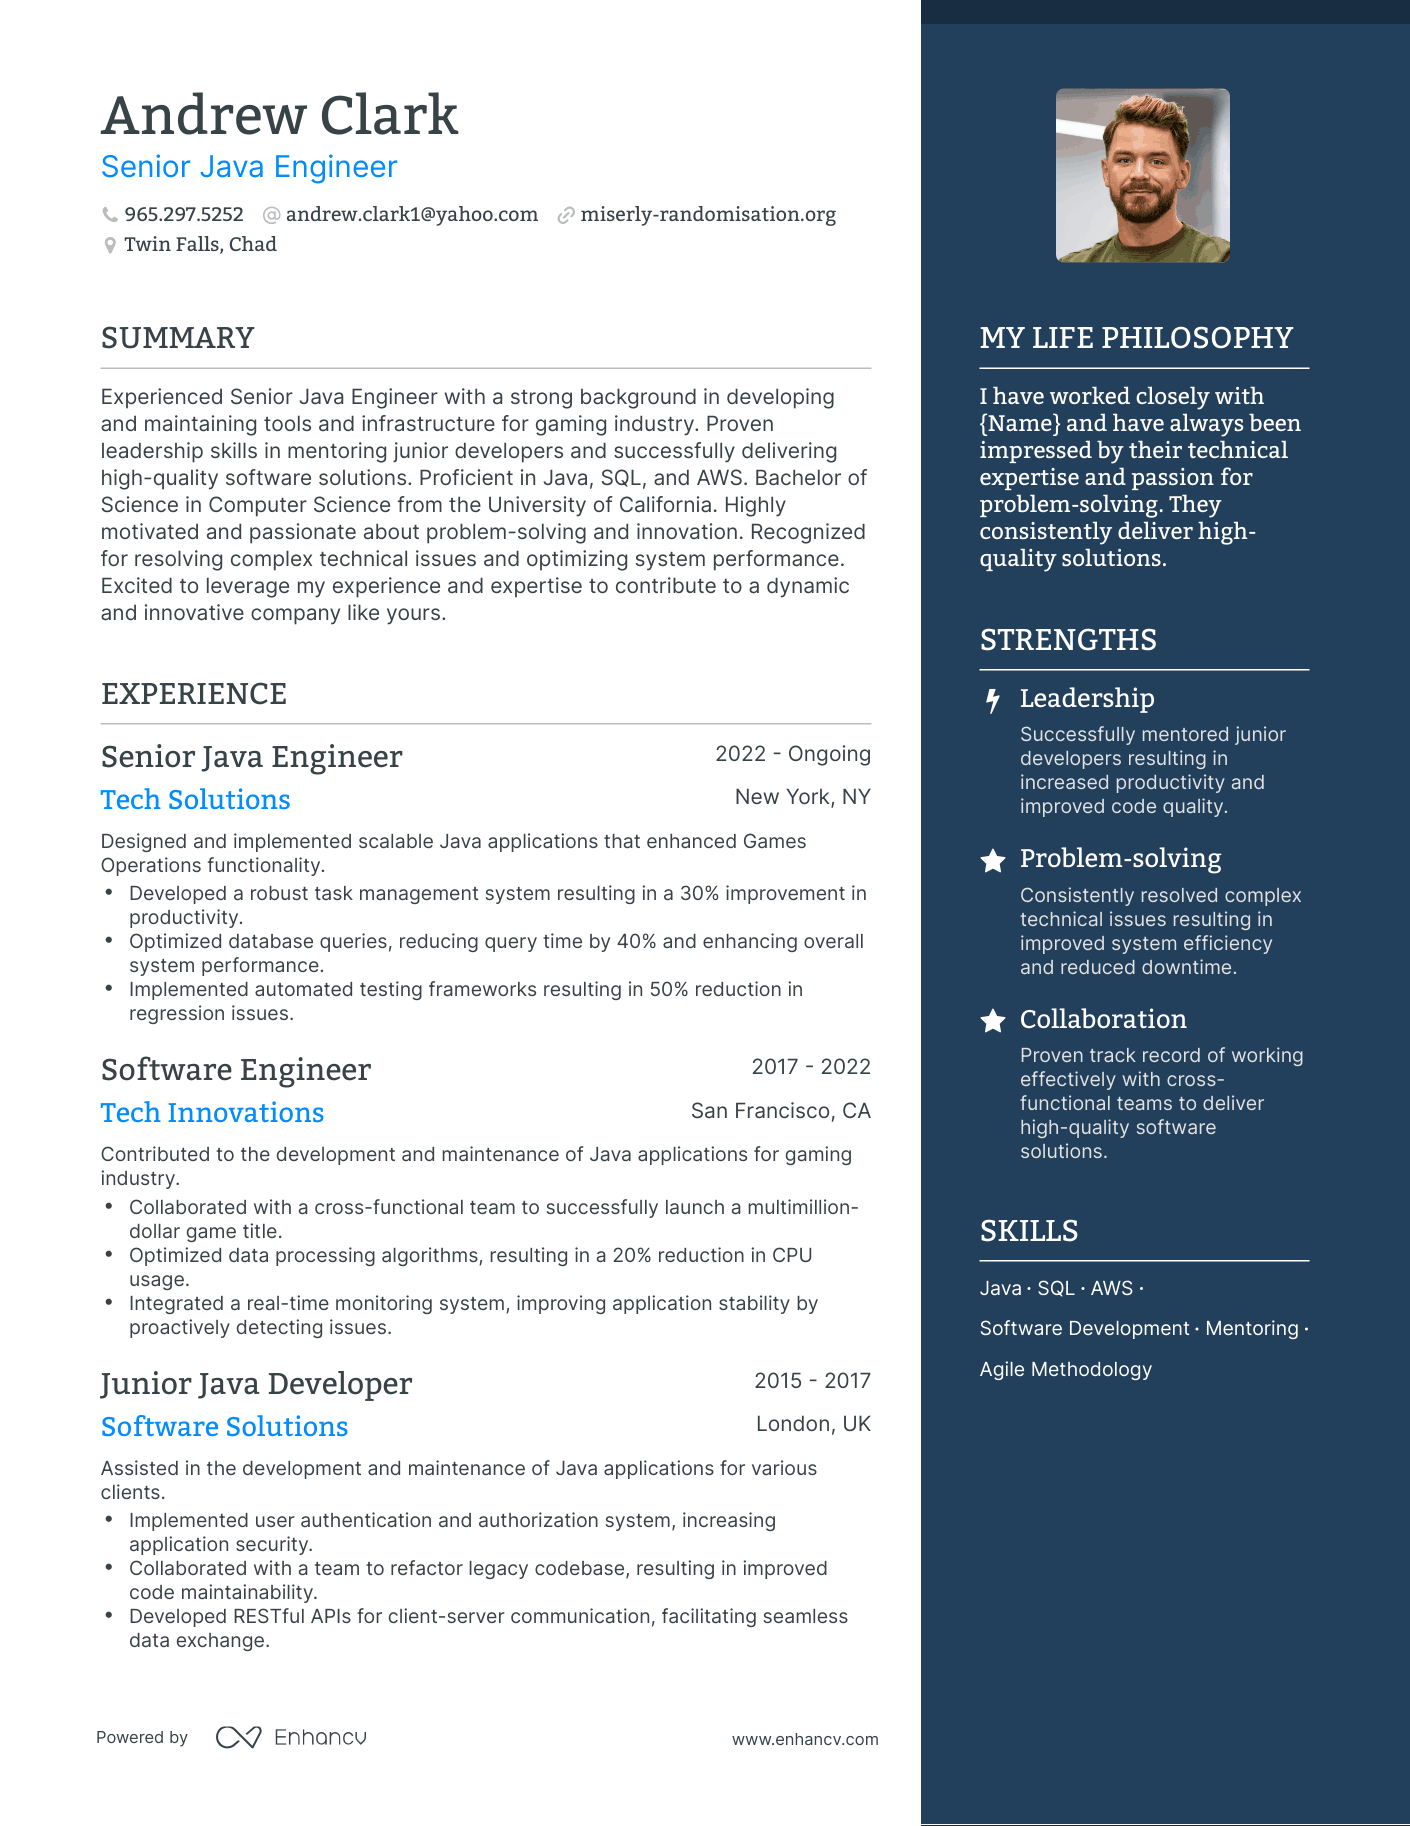 3 Senior Java Engineer Resume Examples & HowTo Guide for 2023